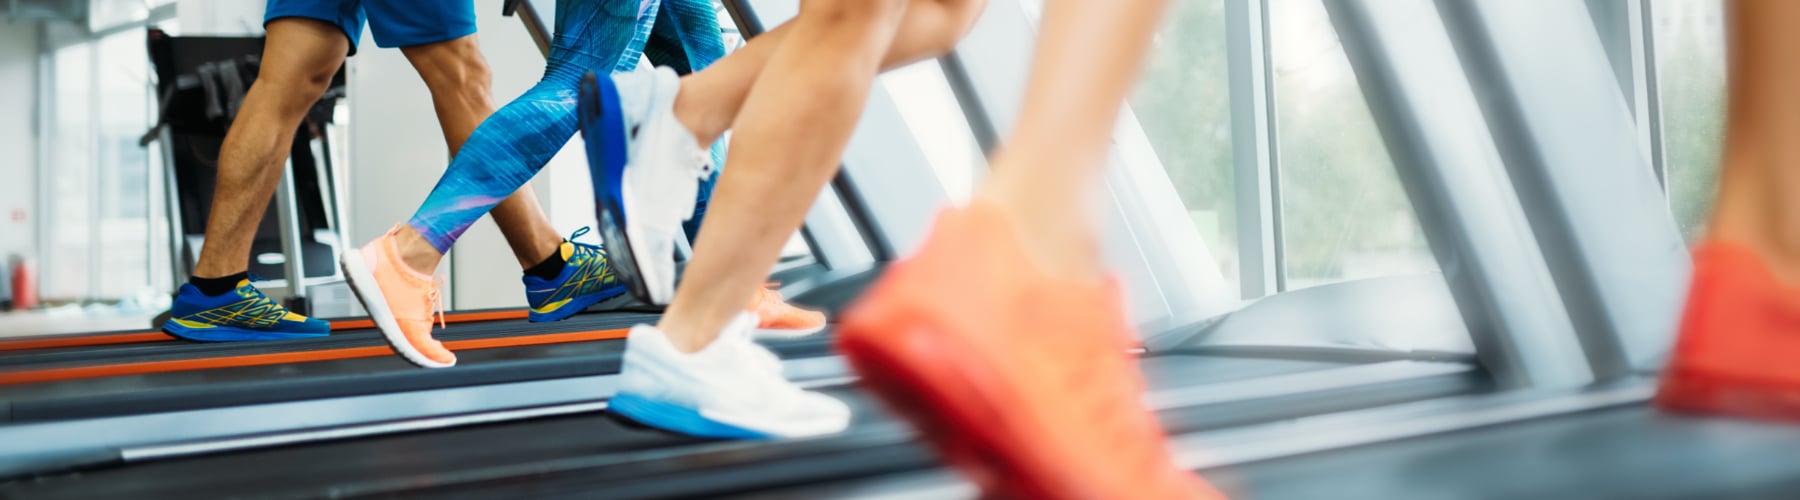 group of people's feet using treadmills at the gym